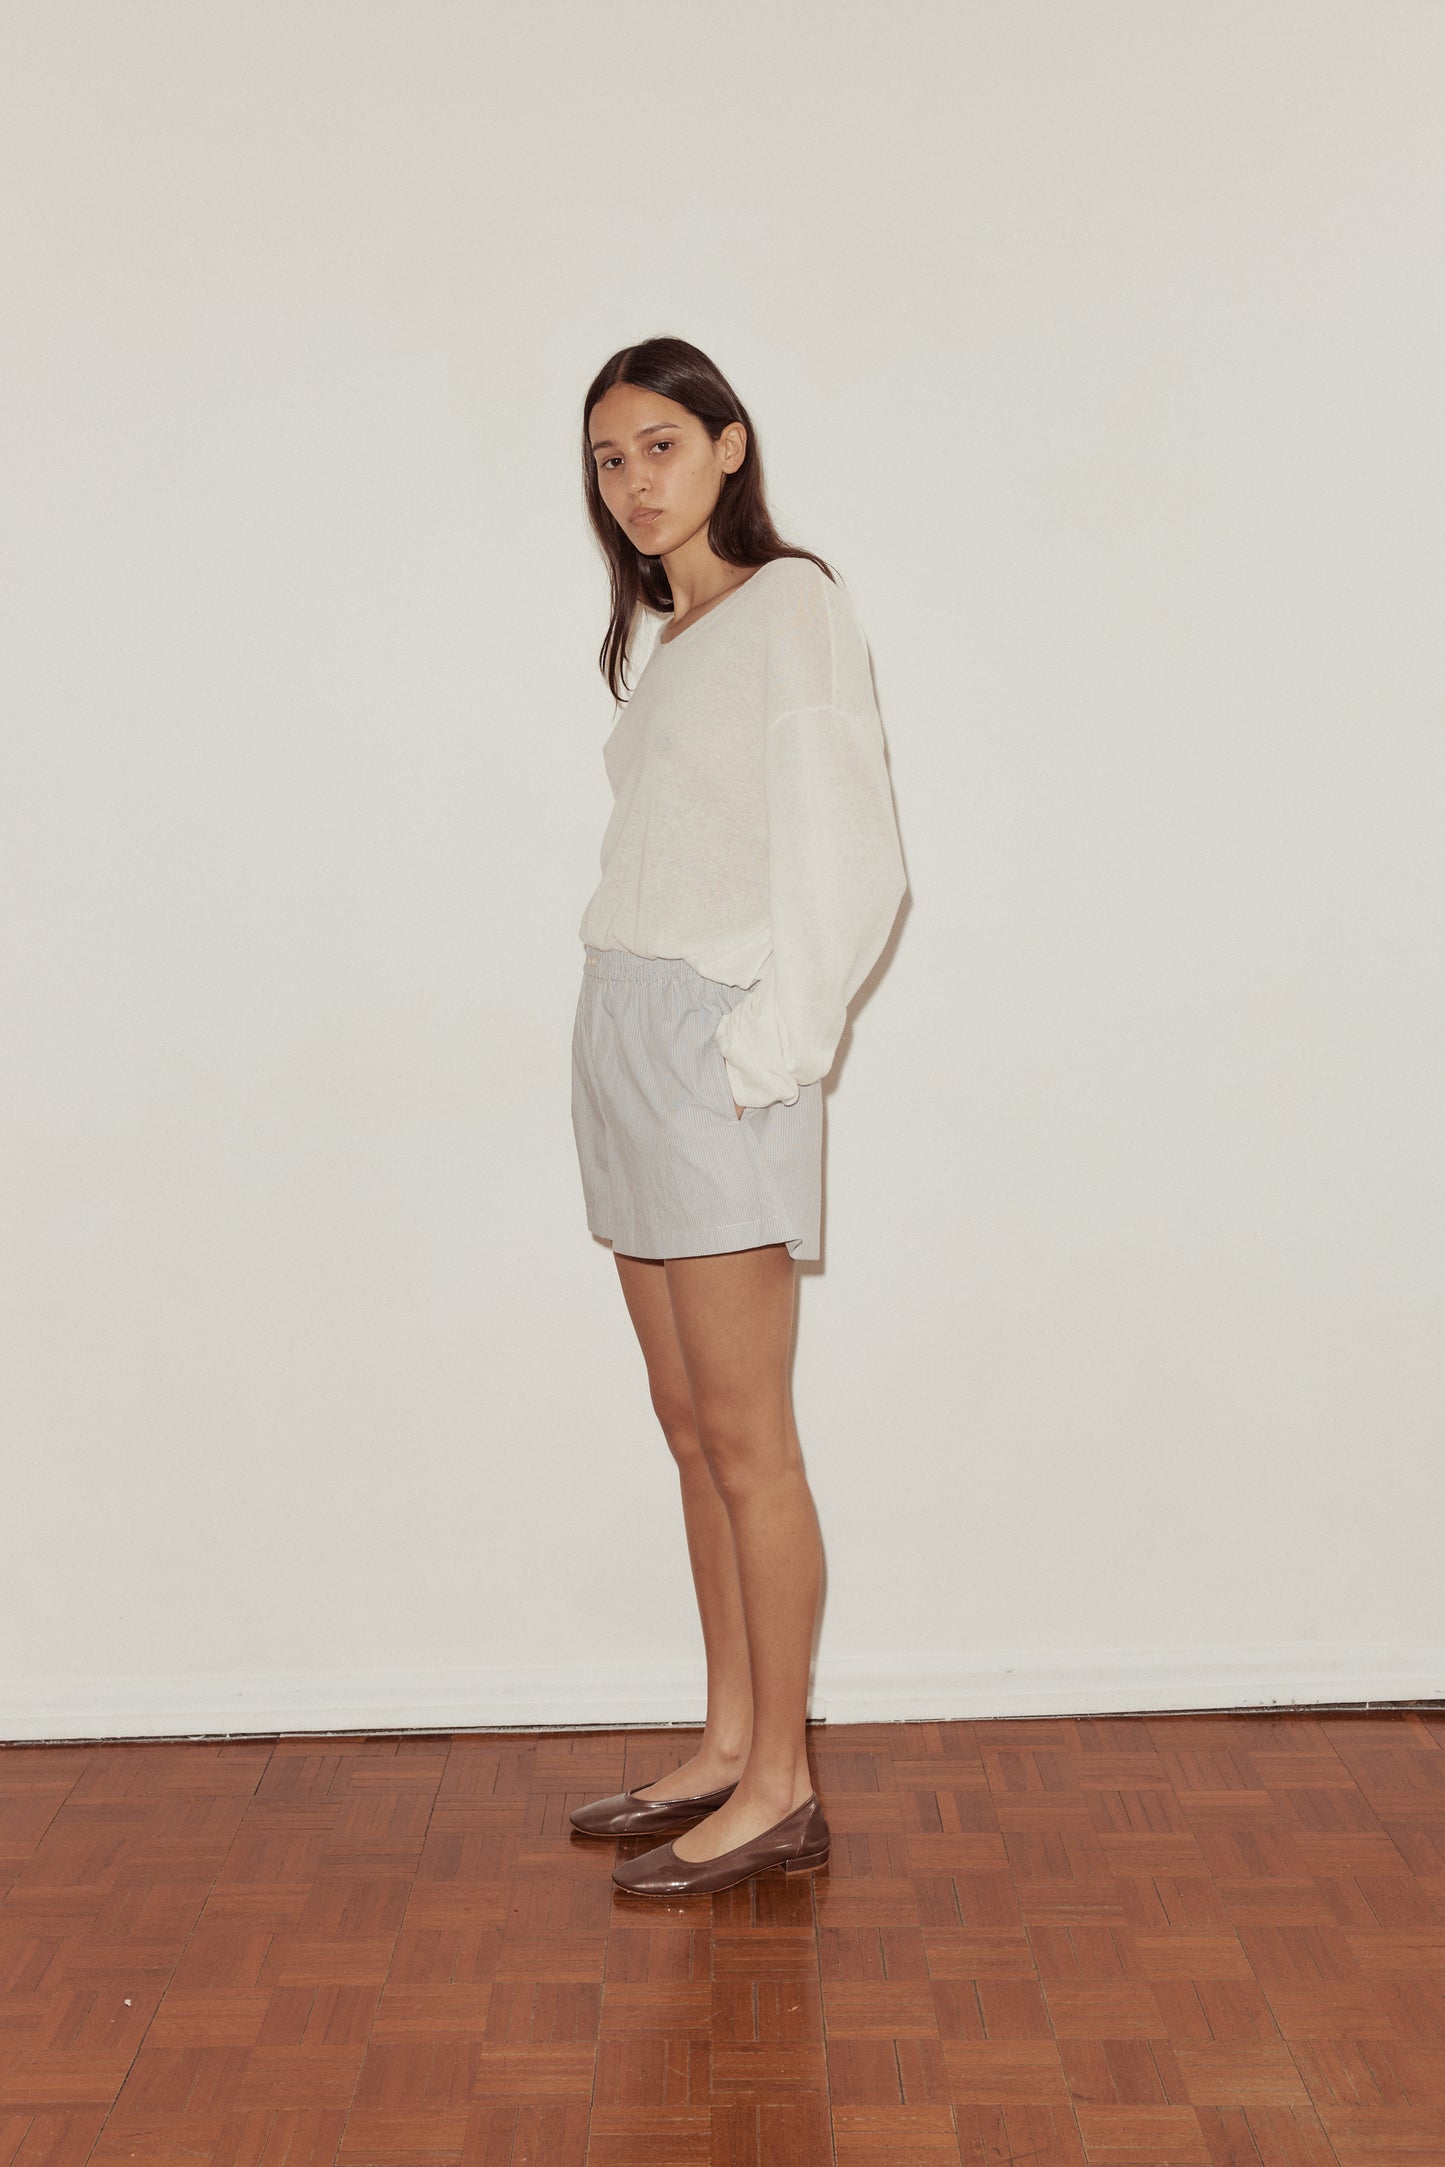 Side shot of female model wearing the Loose Long Sleeve Knitted Top by Deiji Studios in white, elongated sleeve folds over wrist of hand in Boxer short pocket.